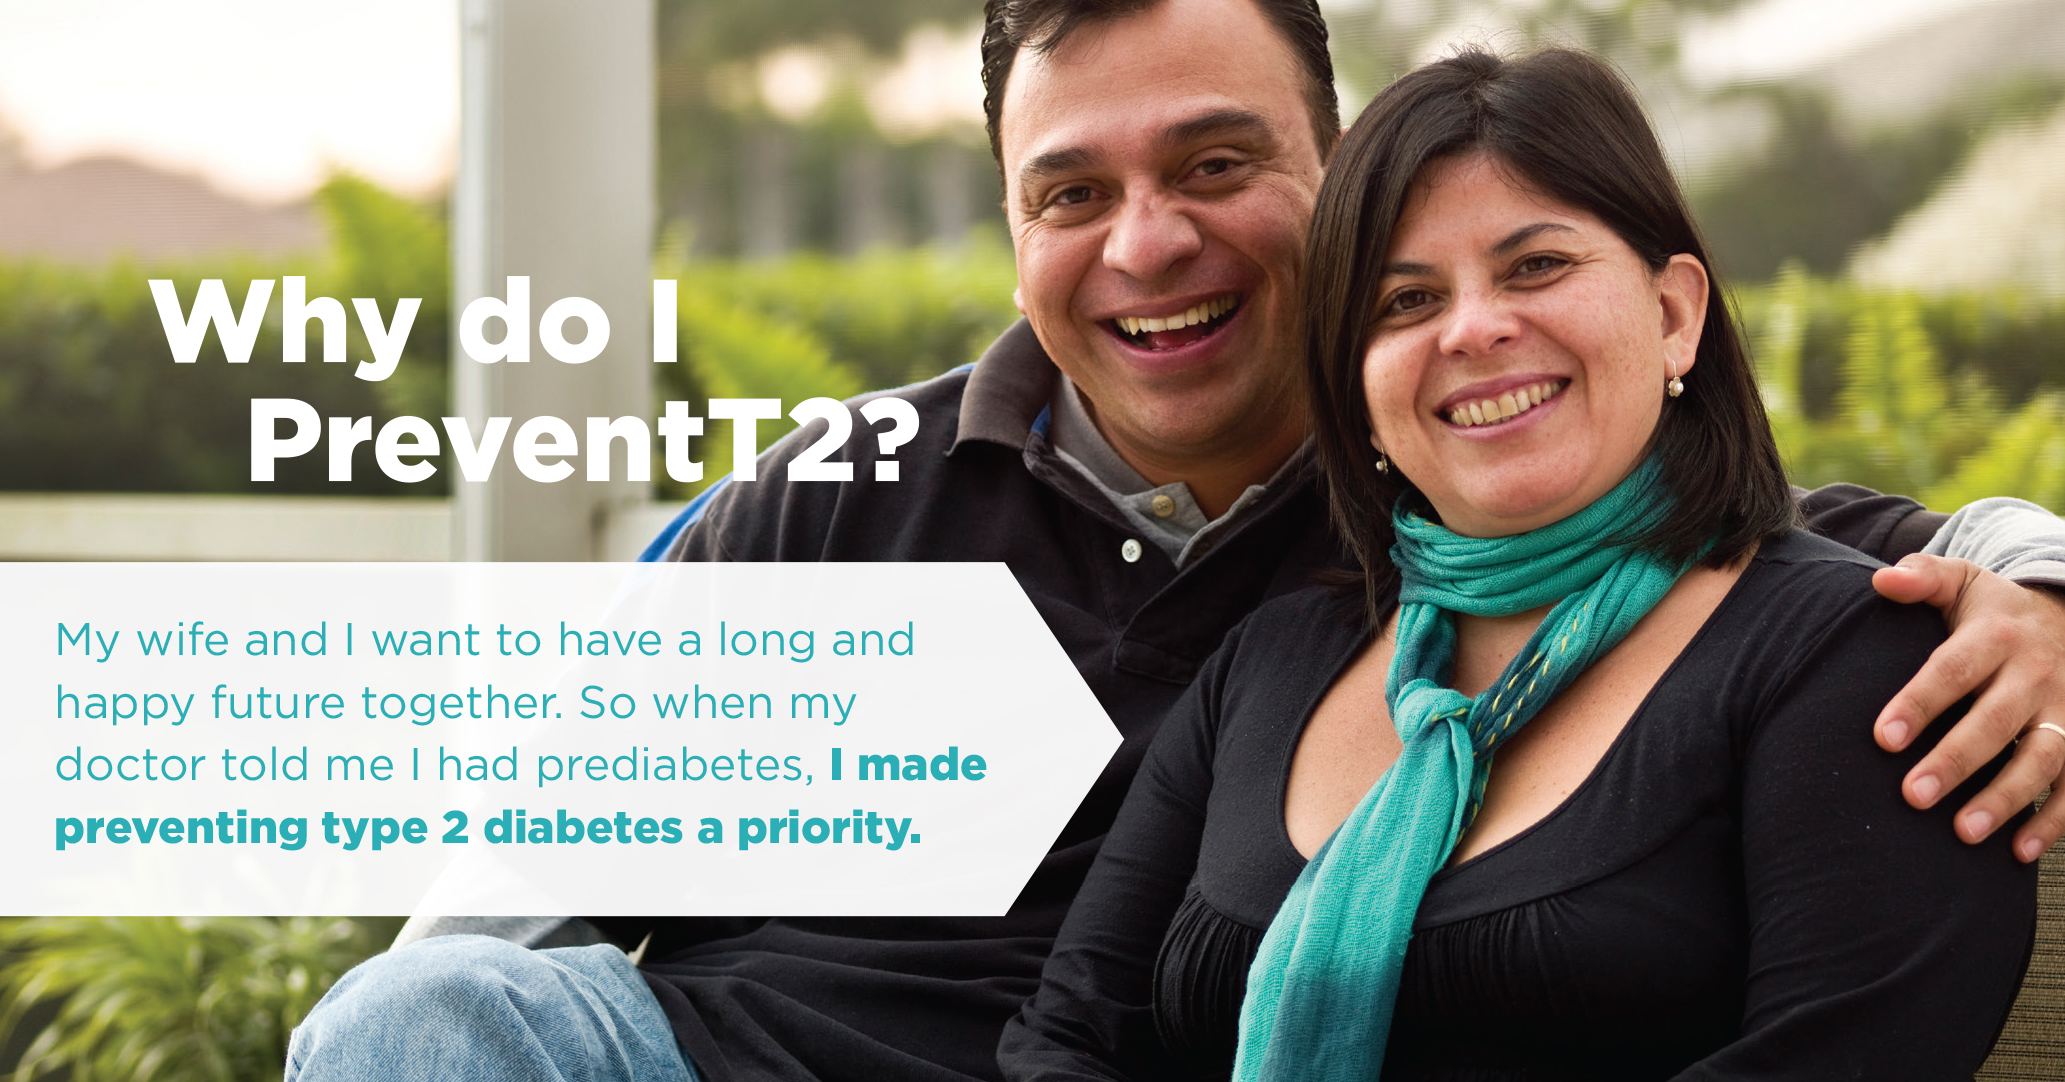 Image of happy Hispanic couple with text reading Why do I PreventT2? My wife and I want to have a long and happy future together. So when my doctor told me I had prediabetes, I made preventing type 2 diabetes a priority.